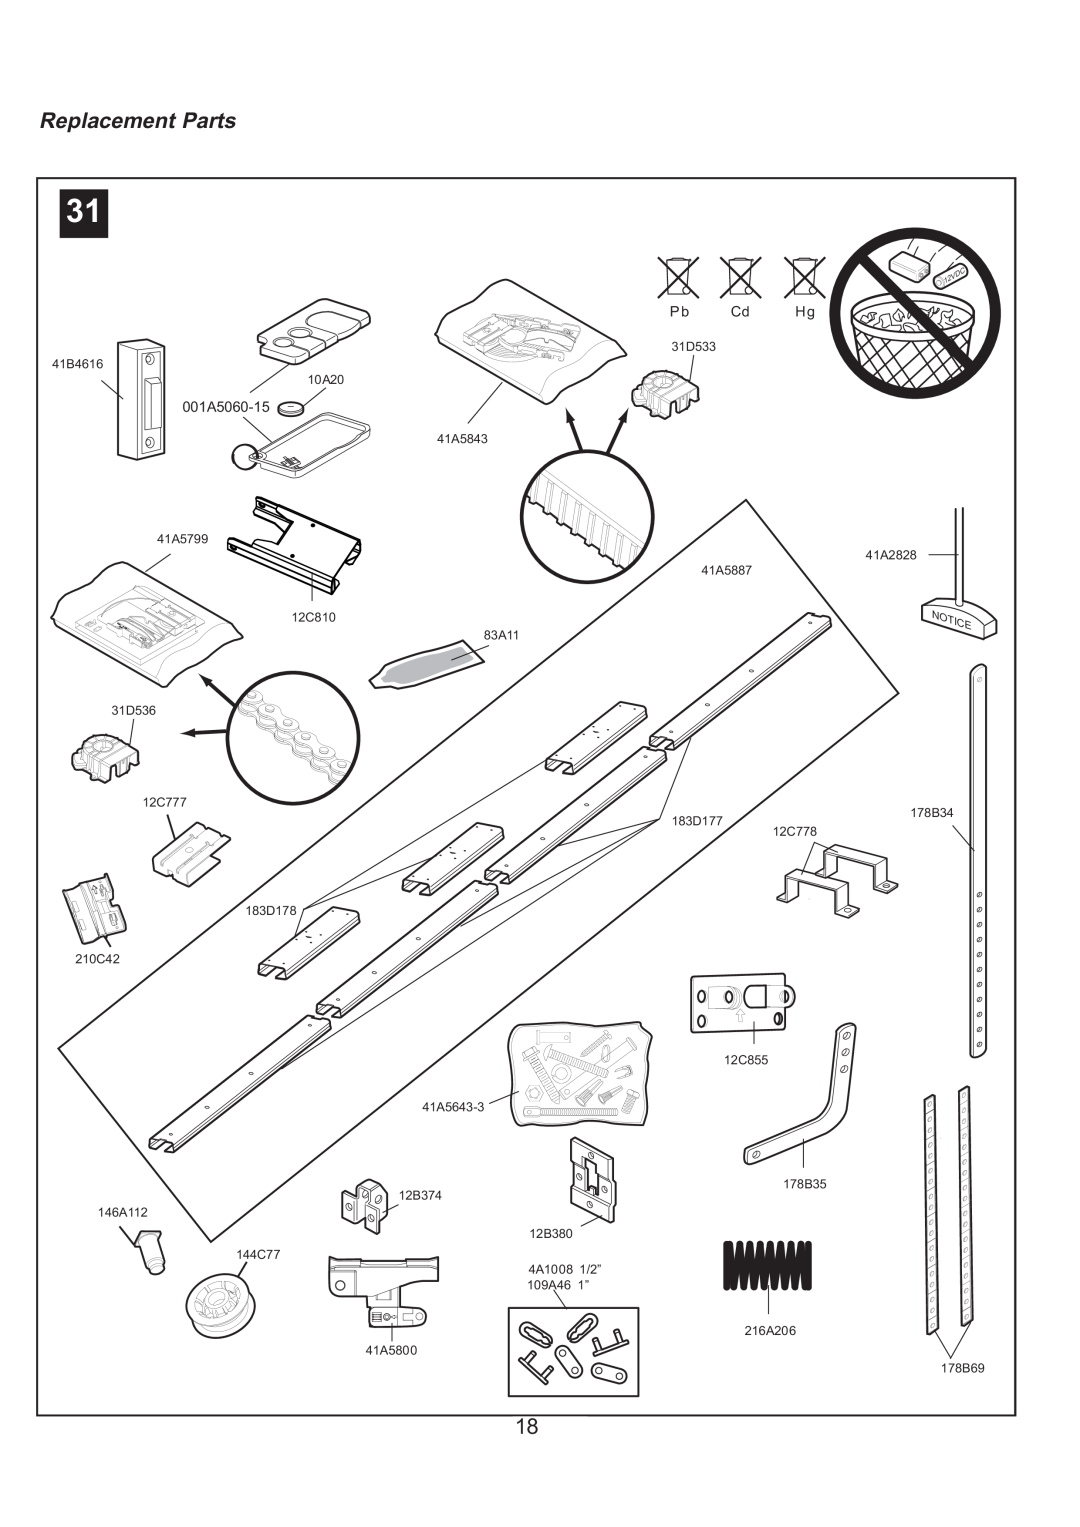 Sigma ML750 instruction manual Replacement Parts, 001A5060-15 